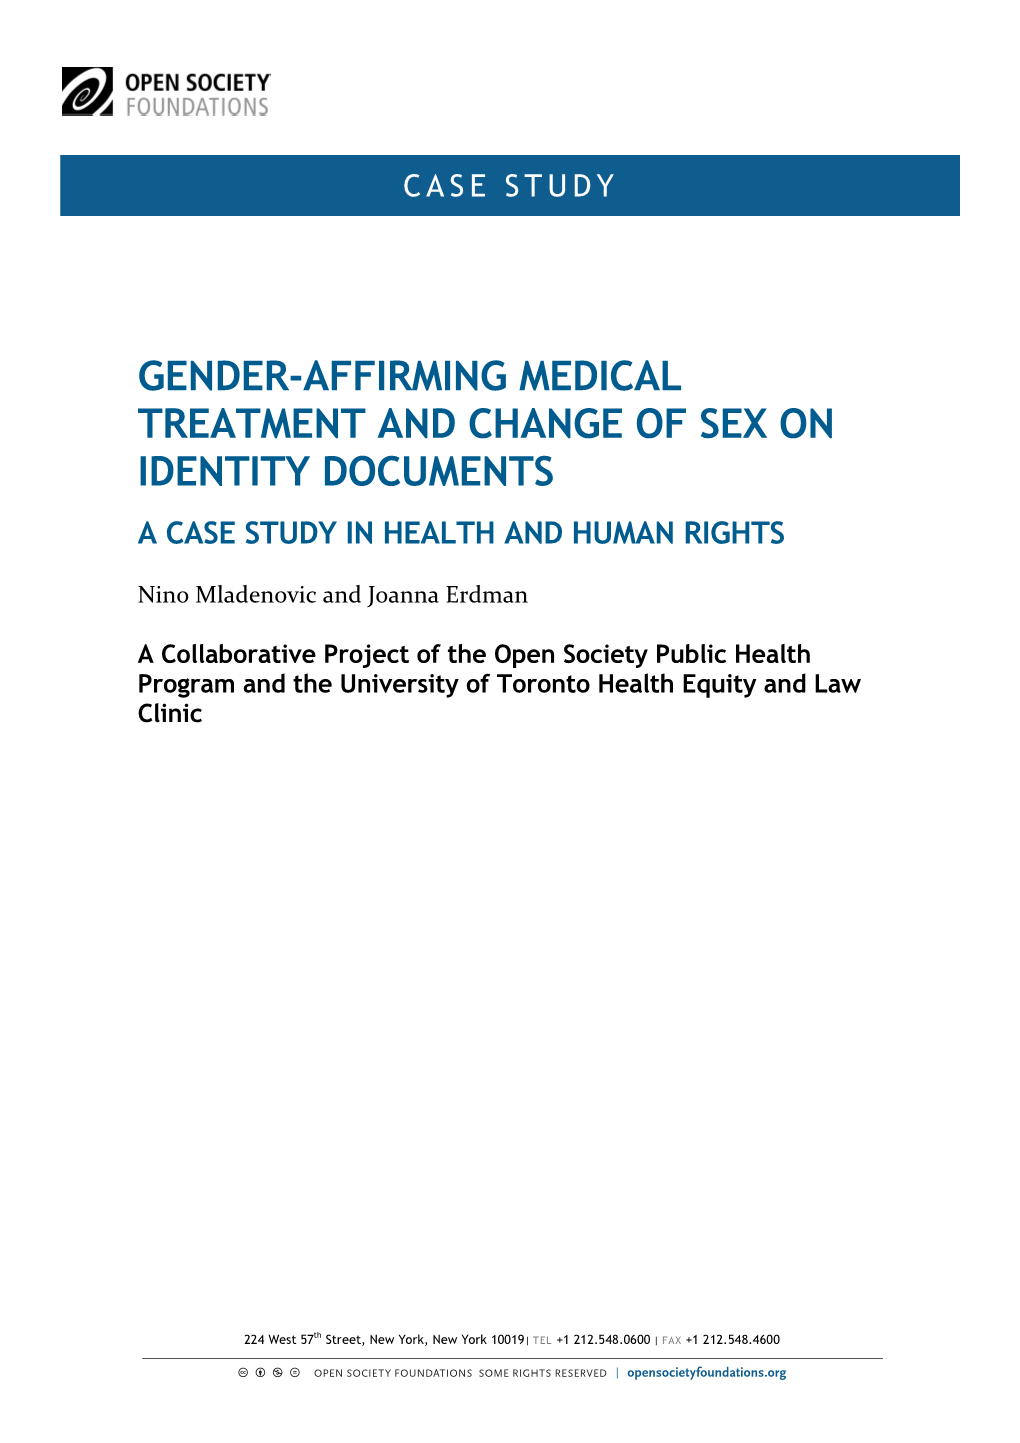 Gender-Affirming Medical Treatment and Change of Sex on Identity Documents